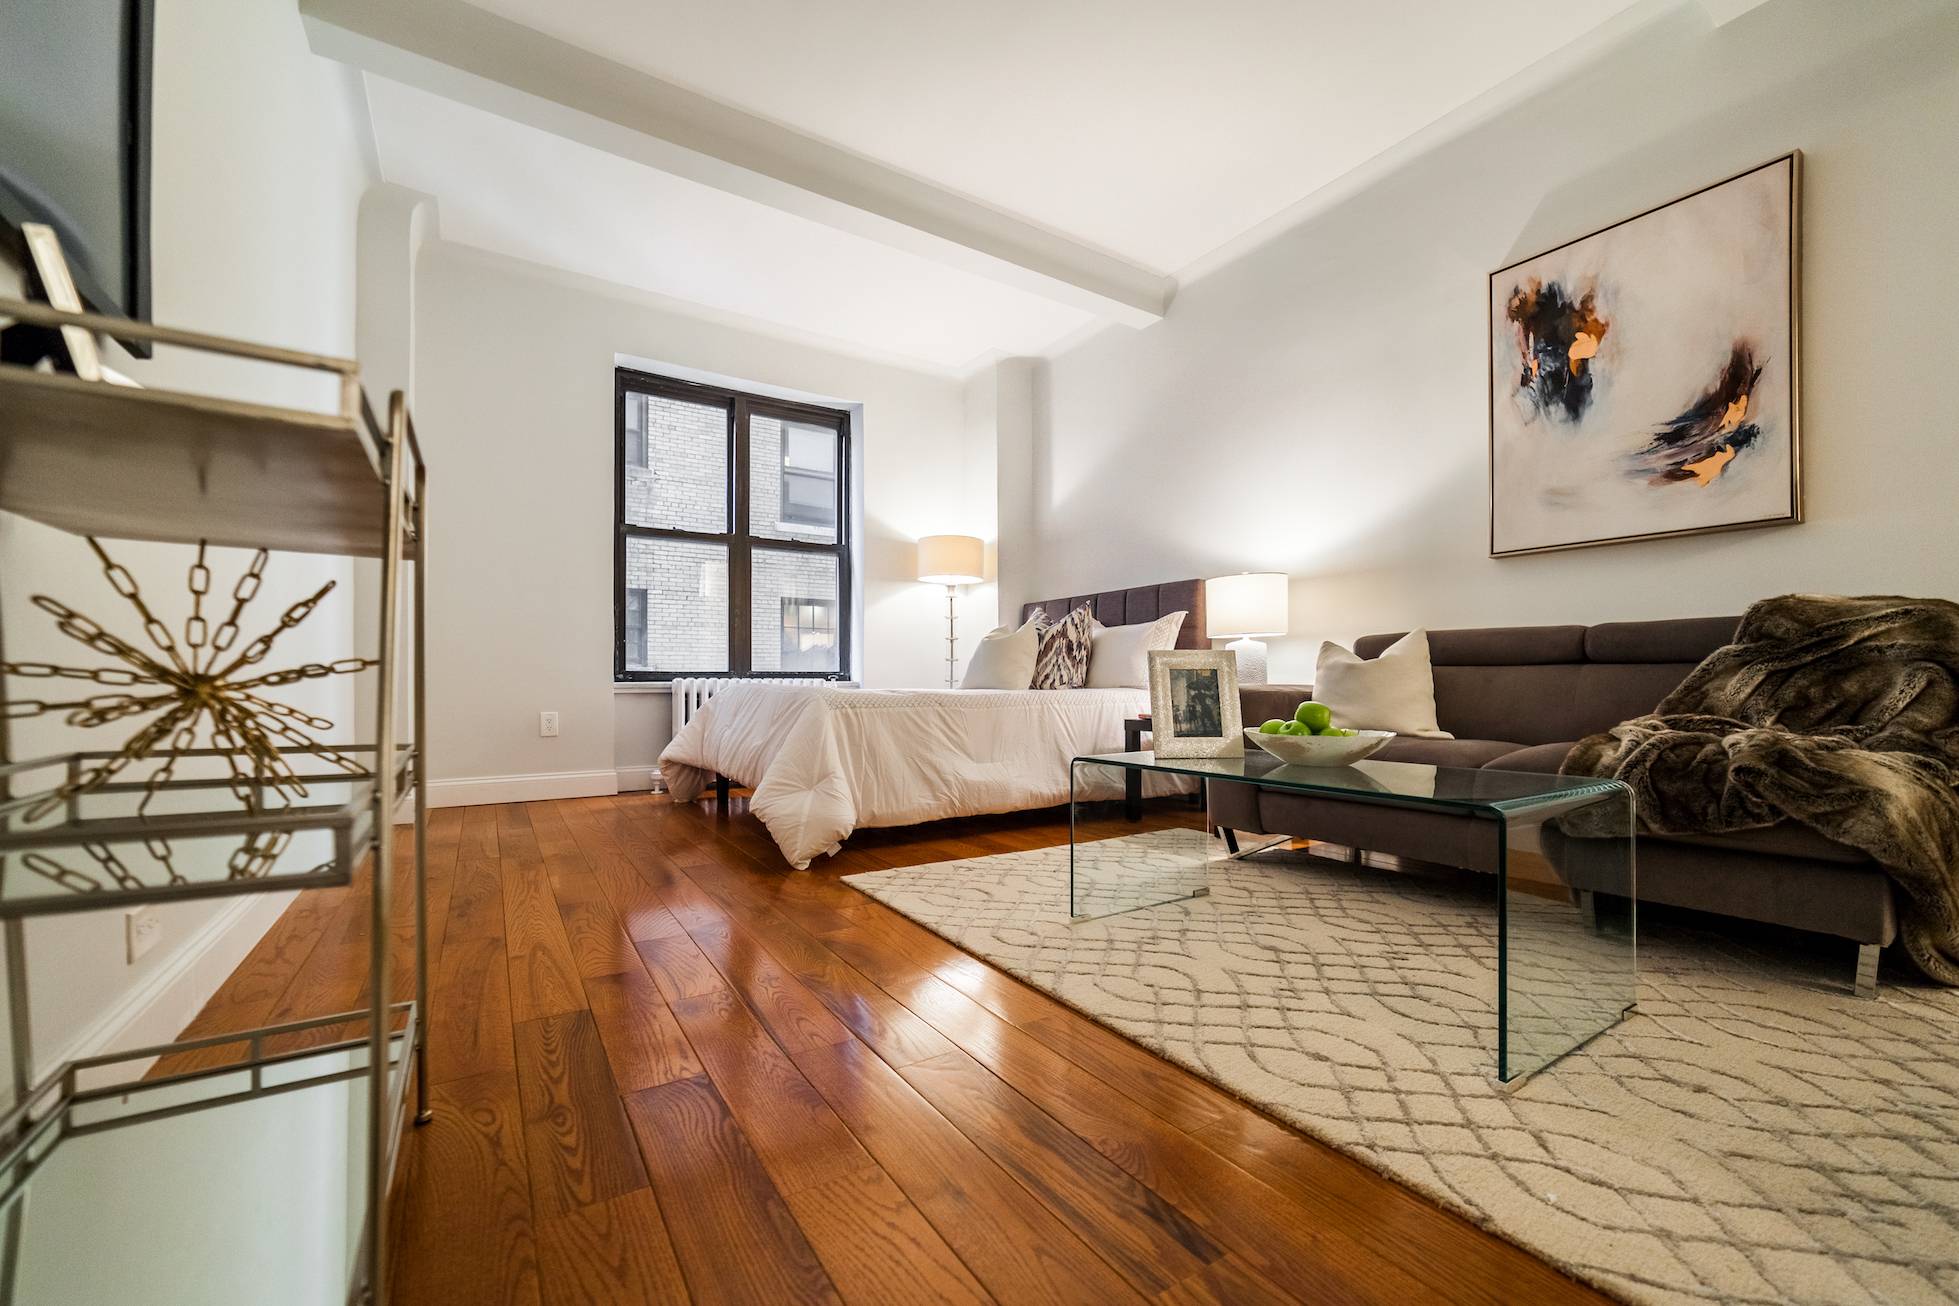 NO FEE! Beautifully renovated Studio apartment at Central Park West 72nd Street